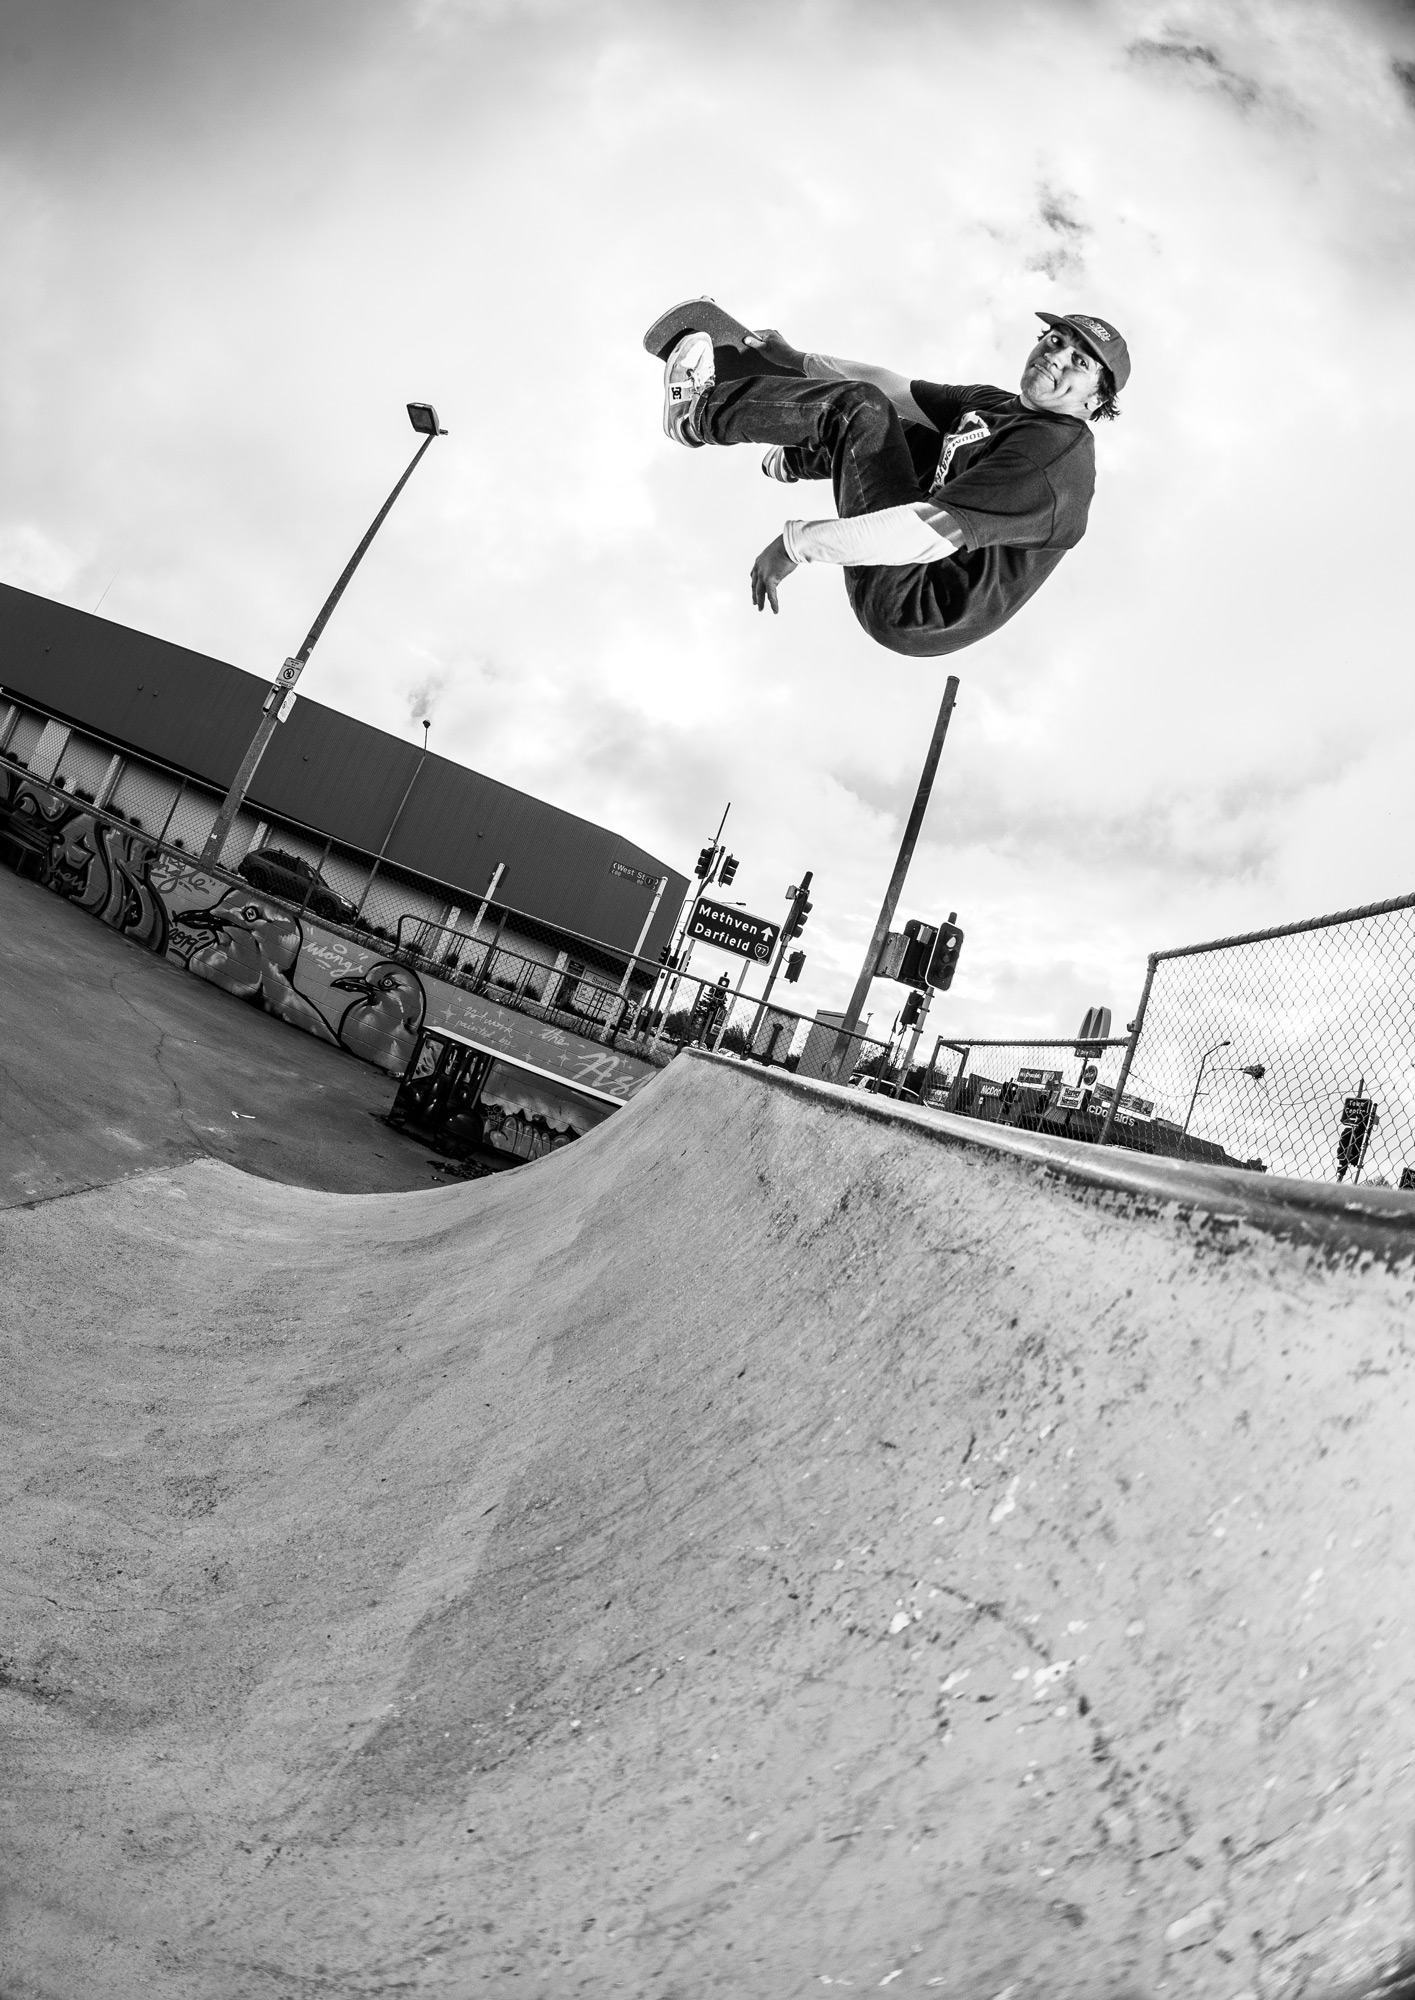 Black and white photo of Pauly Kauri doing a backflip at Ashburton Skatepark. The image is shot using a fisheye lens and is pointing up at Pauly from the ground.